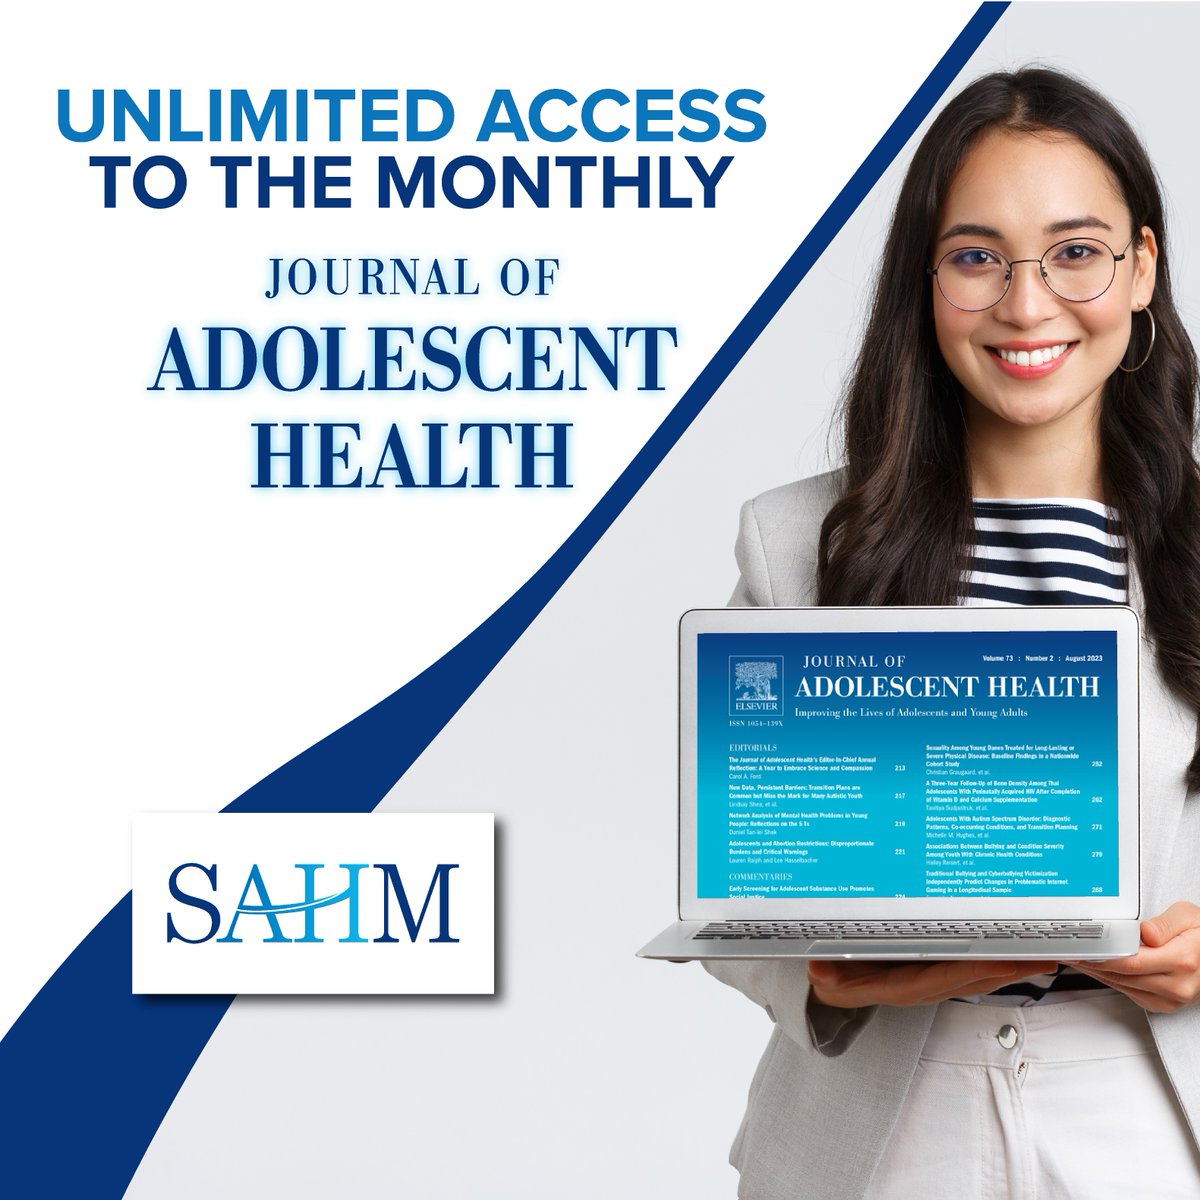 What could be better than unlimited access to the monthly @JAdolesHealth? A SAHM membership — which includes that & much more! View all membership benefits & join us now: bit.ly/3E5VgCo #AdolescentHealth #AdolescentMedicine